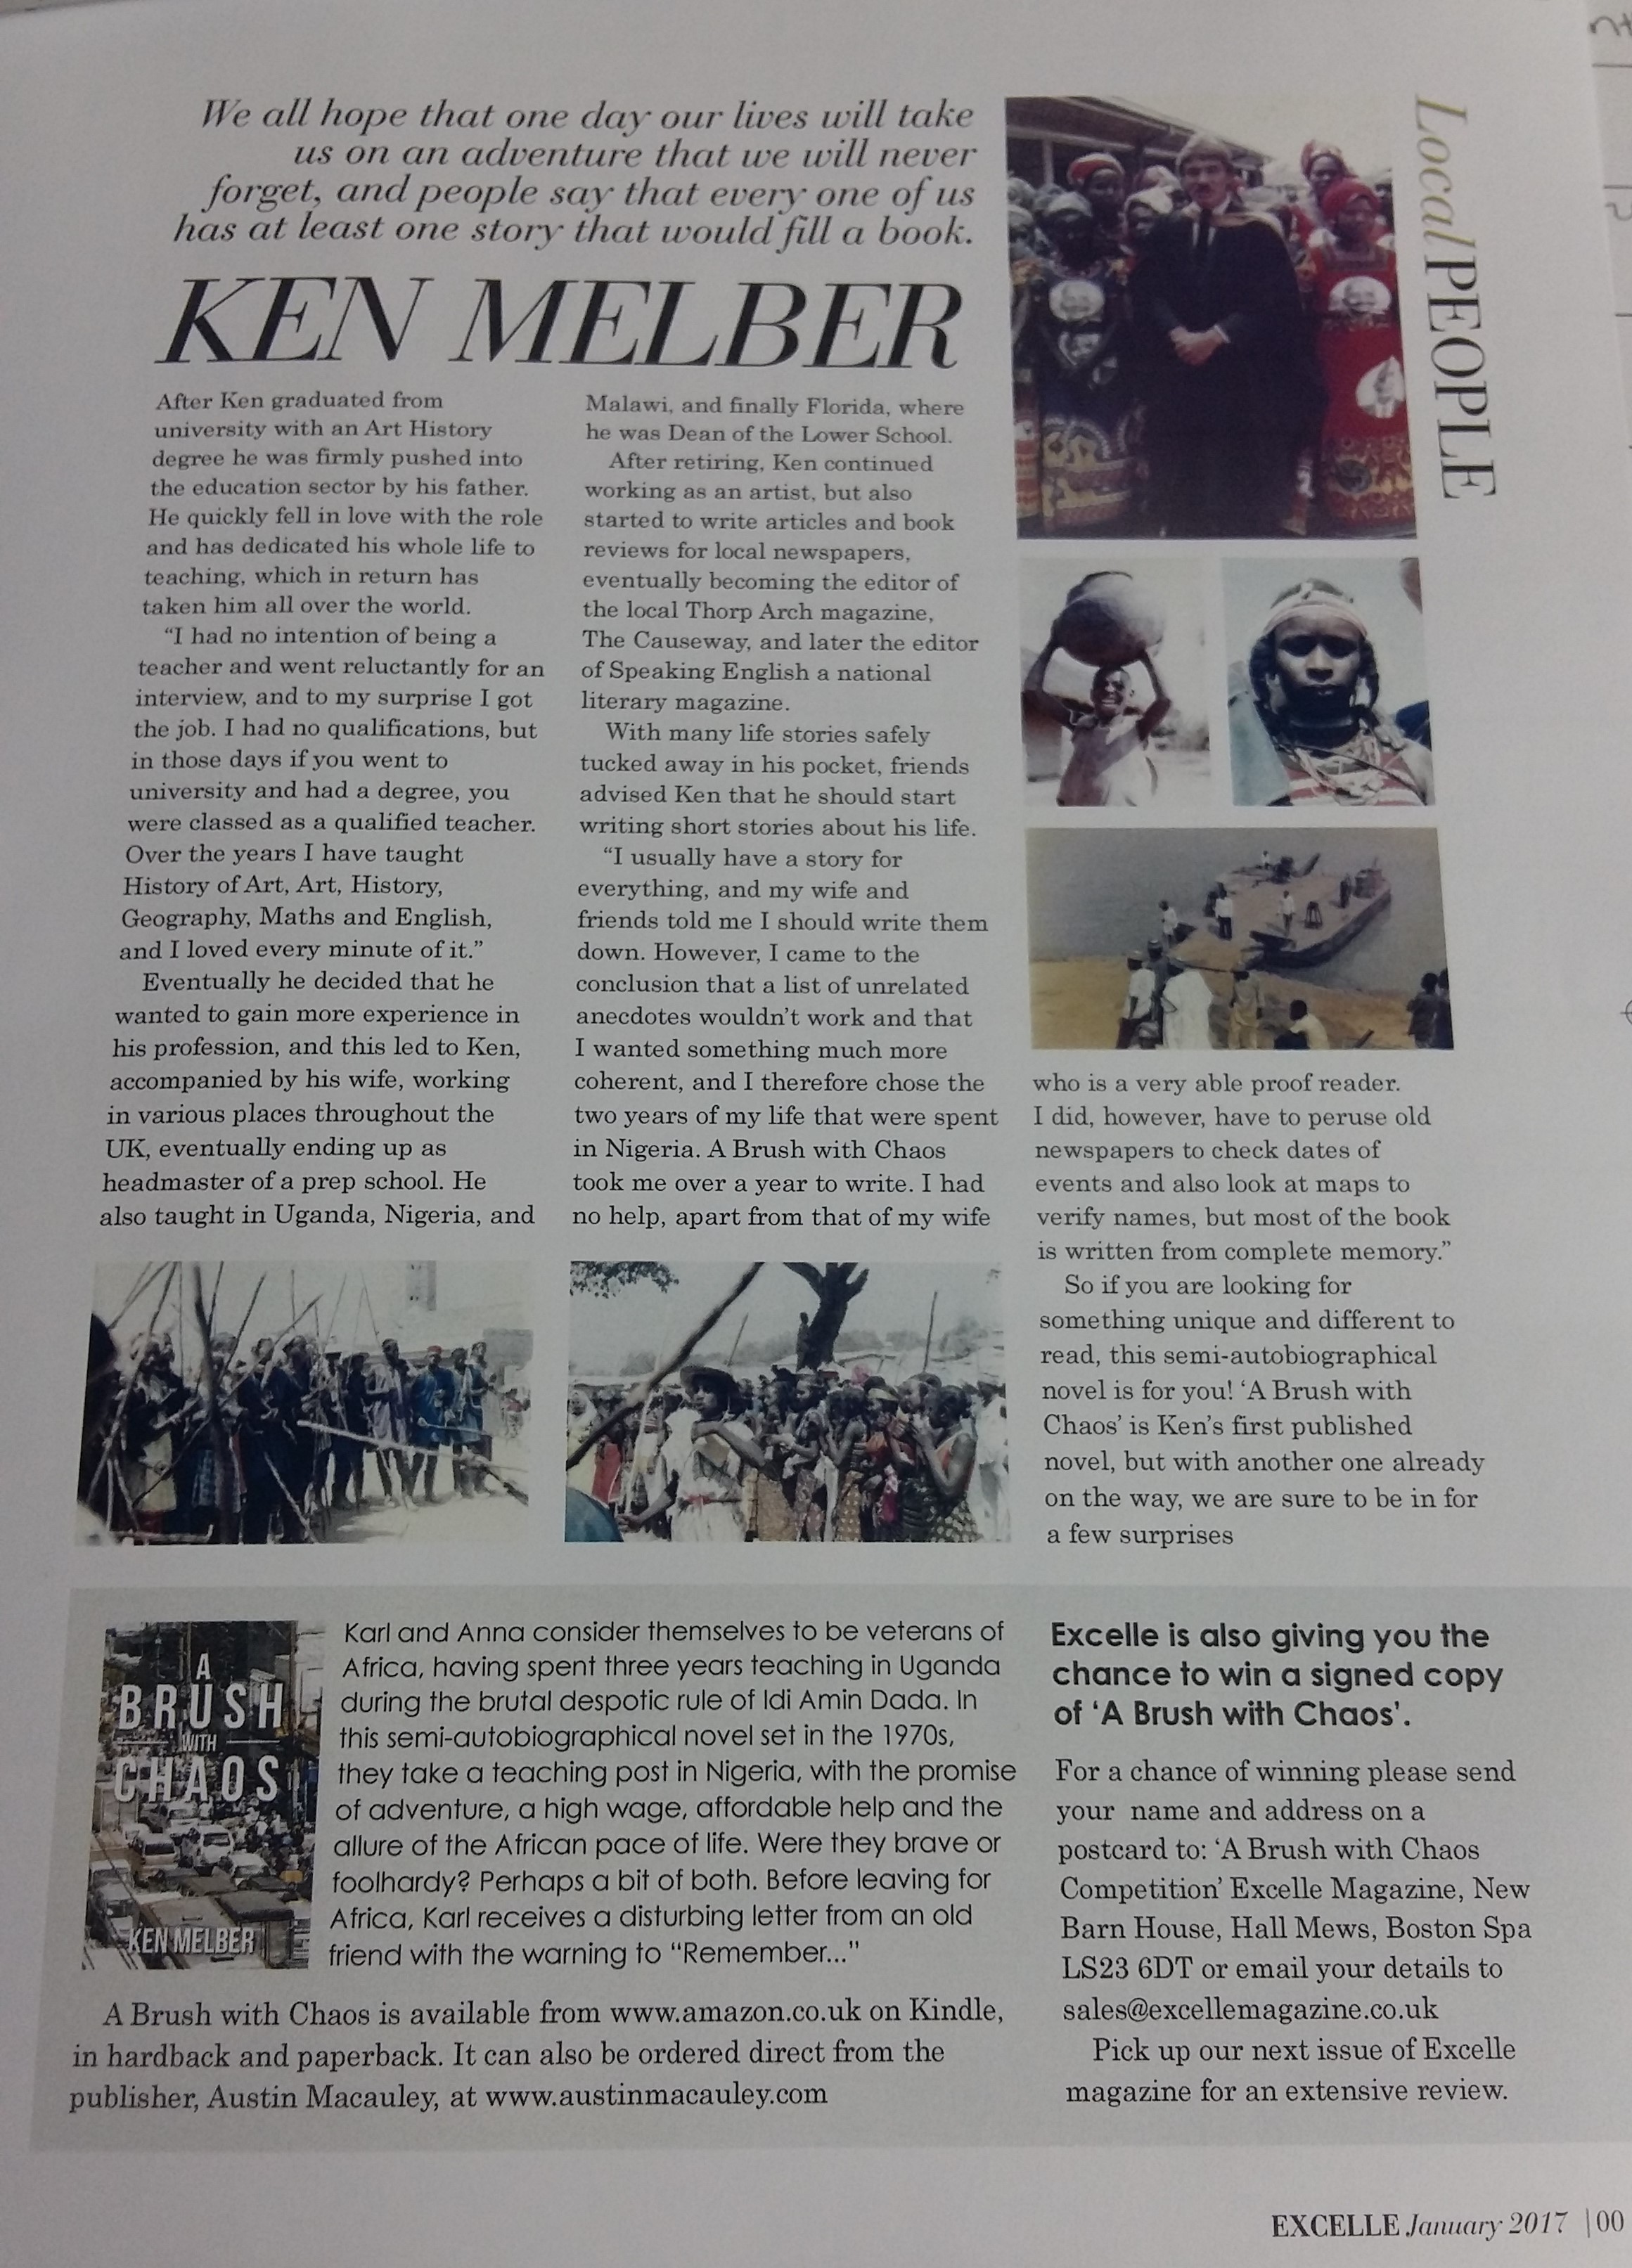 Excelle Magazine features Ken Melber and 'A Brush With Chaos' in Their January Issue